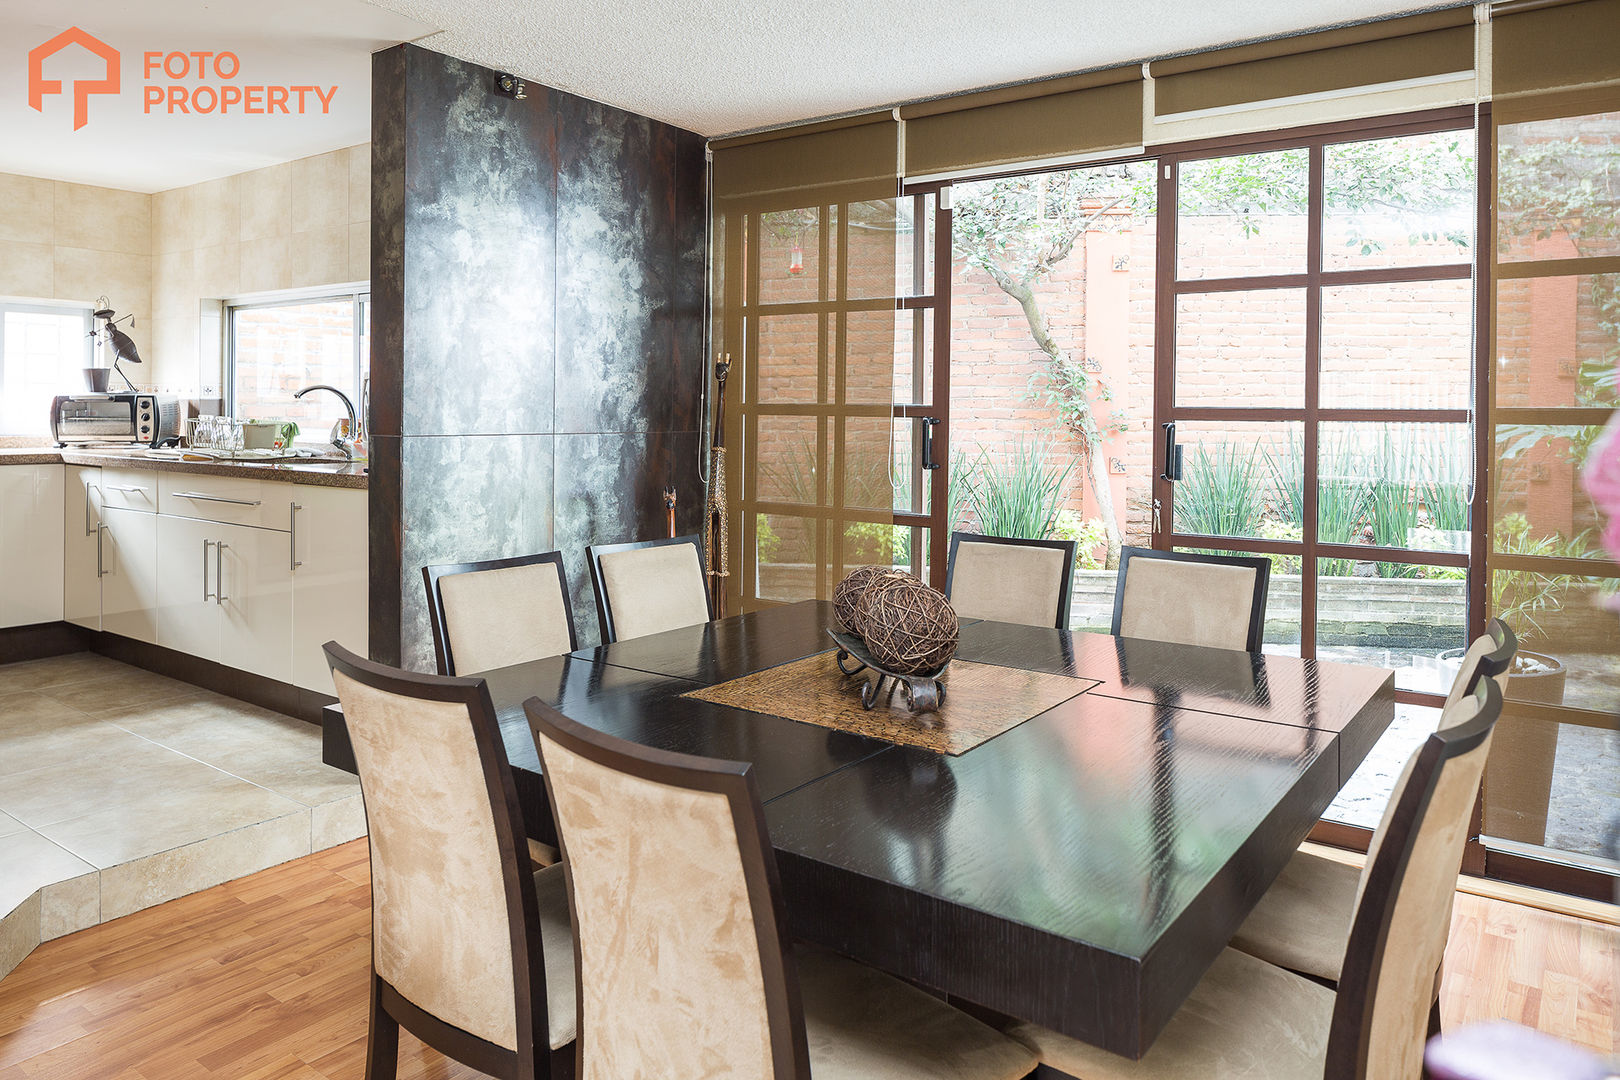 Foto Property, Foto Property Foto Property Classic style dining room